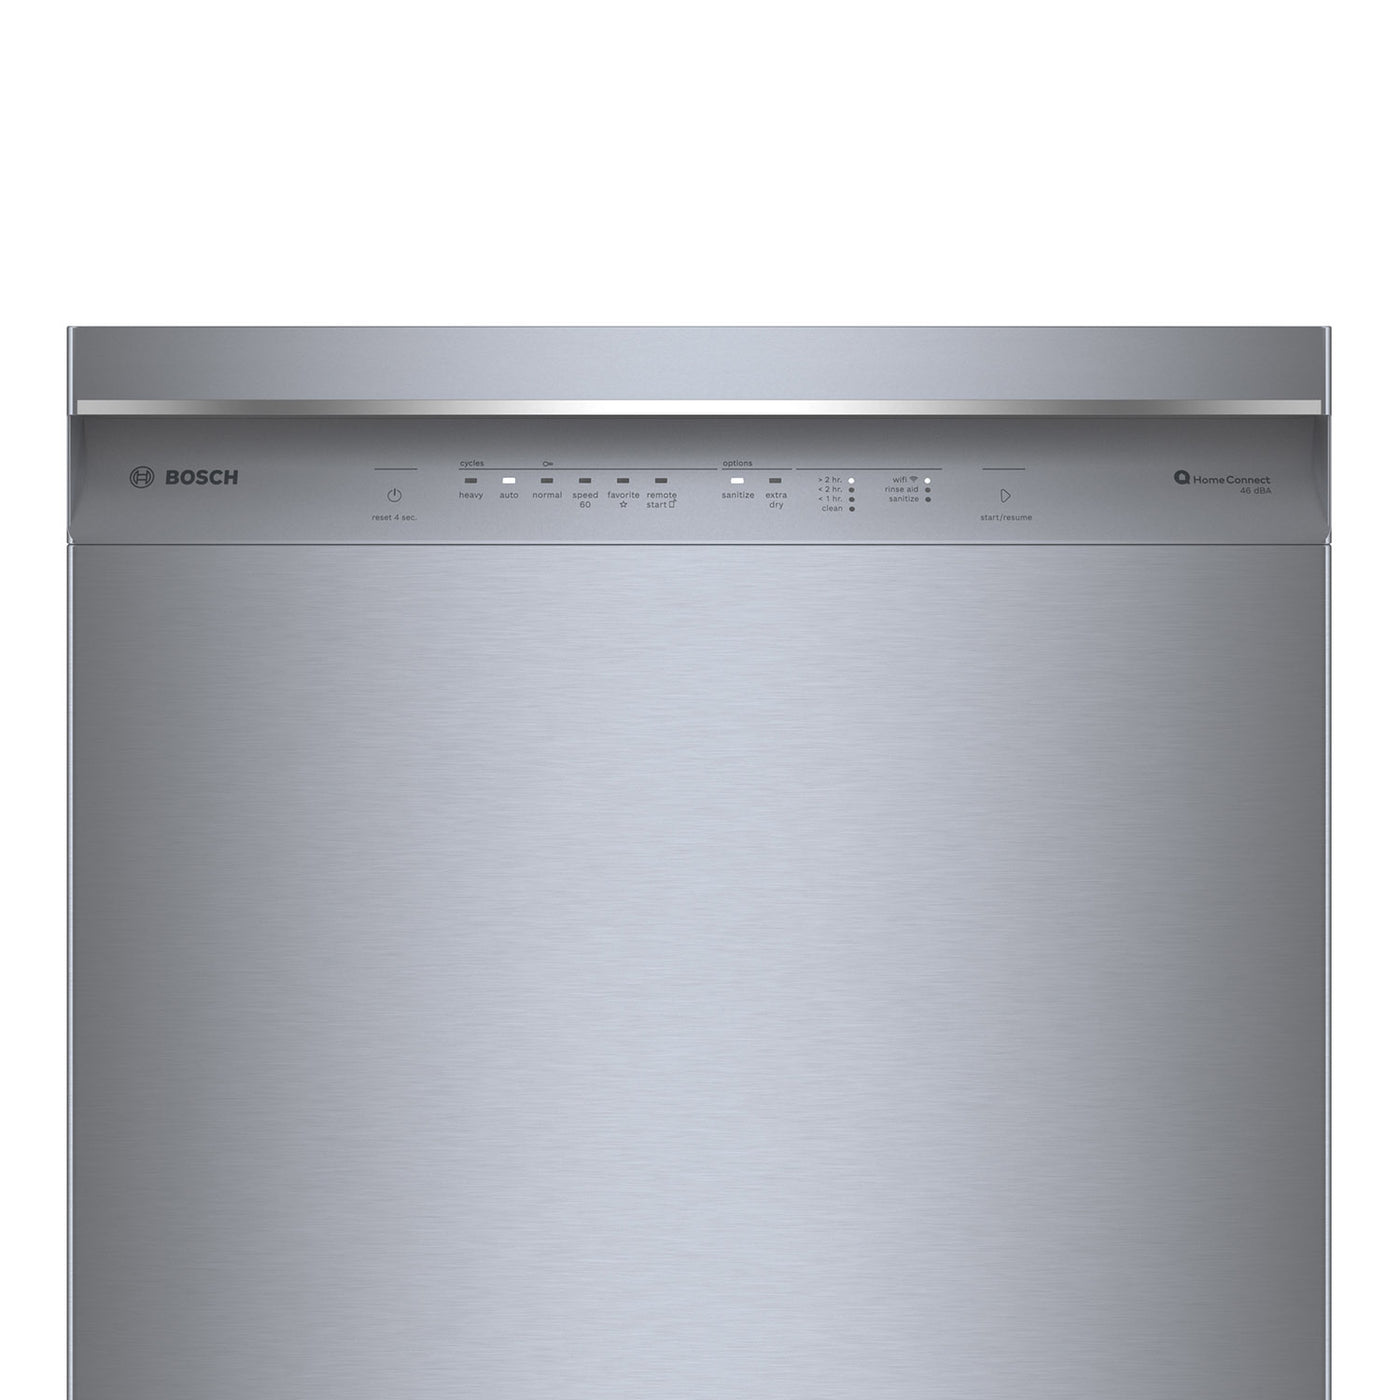 Bosch Stainless Steel 24" Smart Dishwasher with Home Connect, Third Rack - SHE53C85N